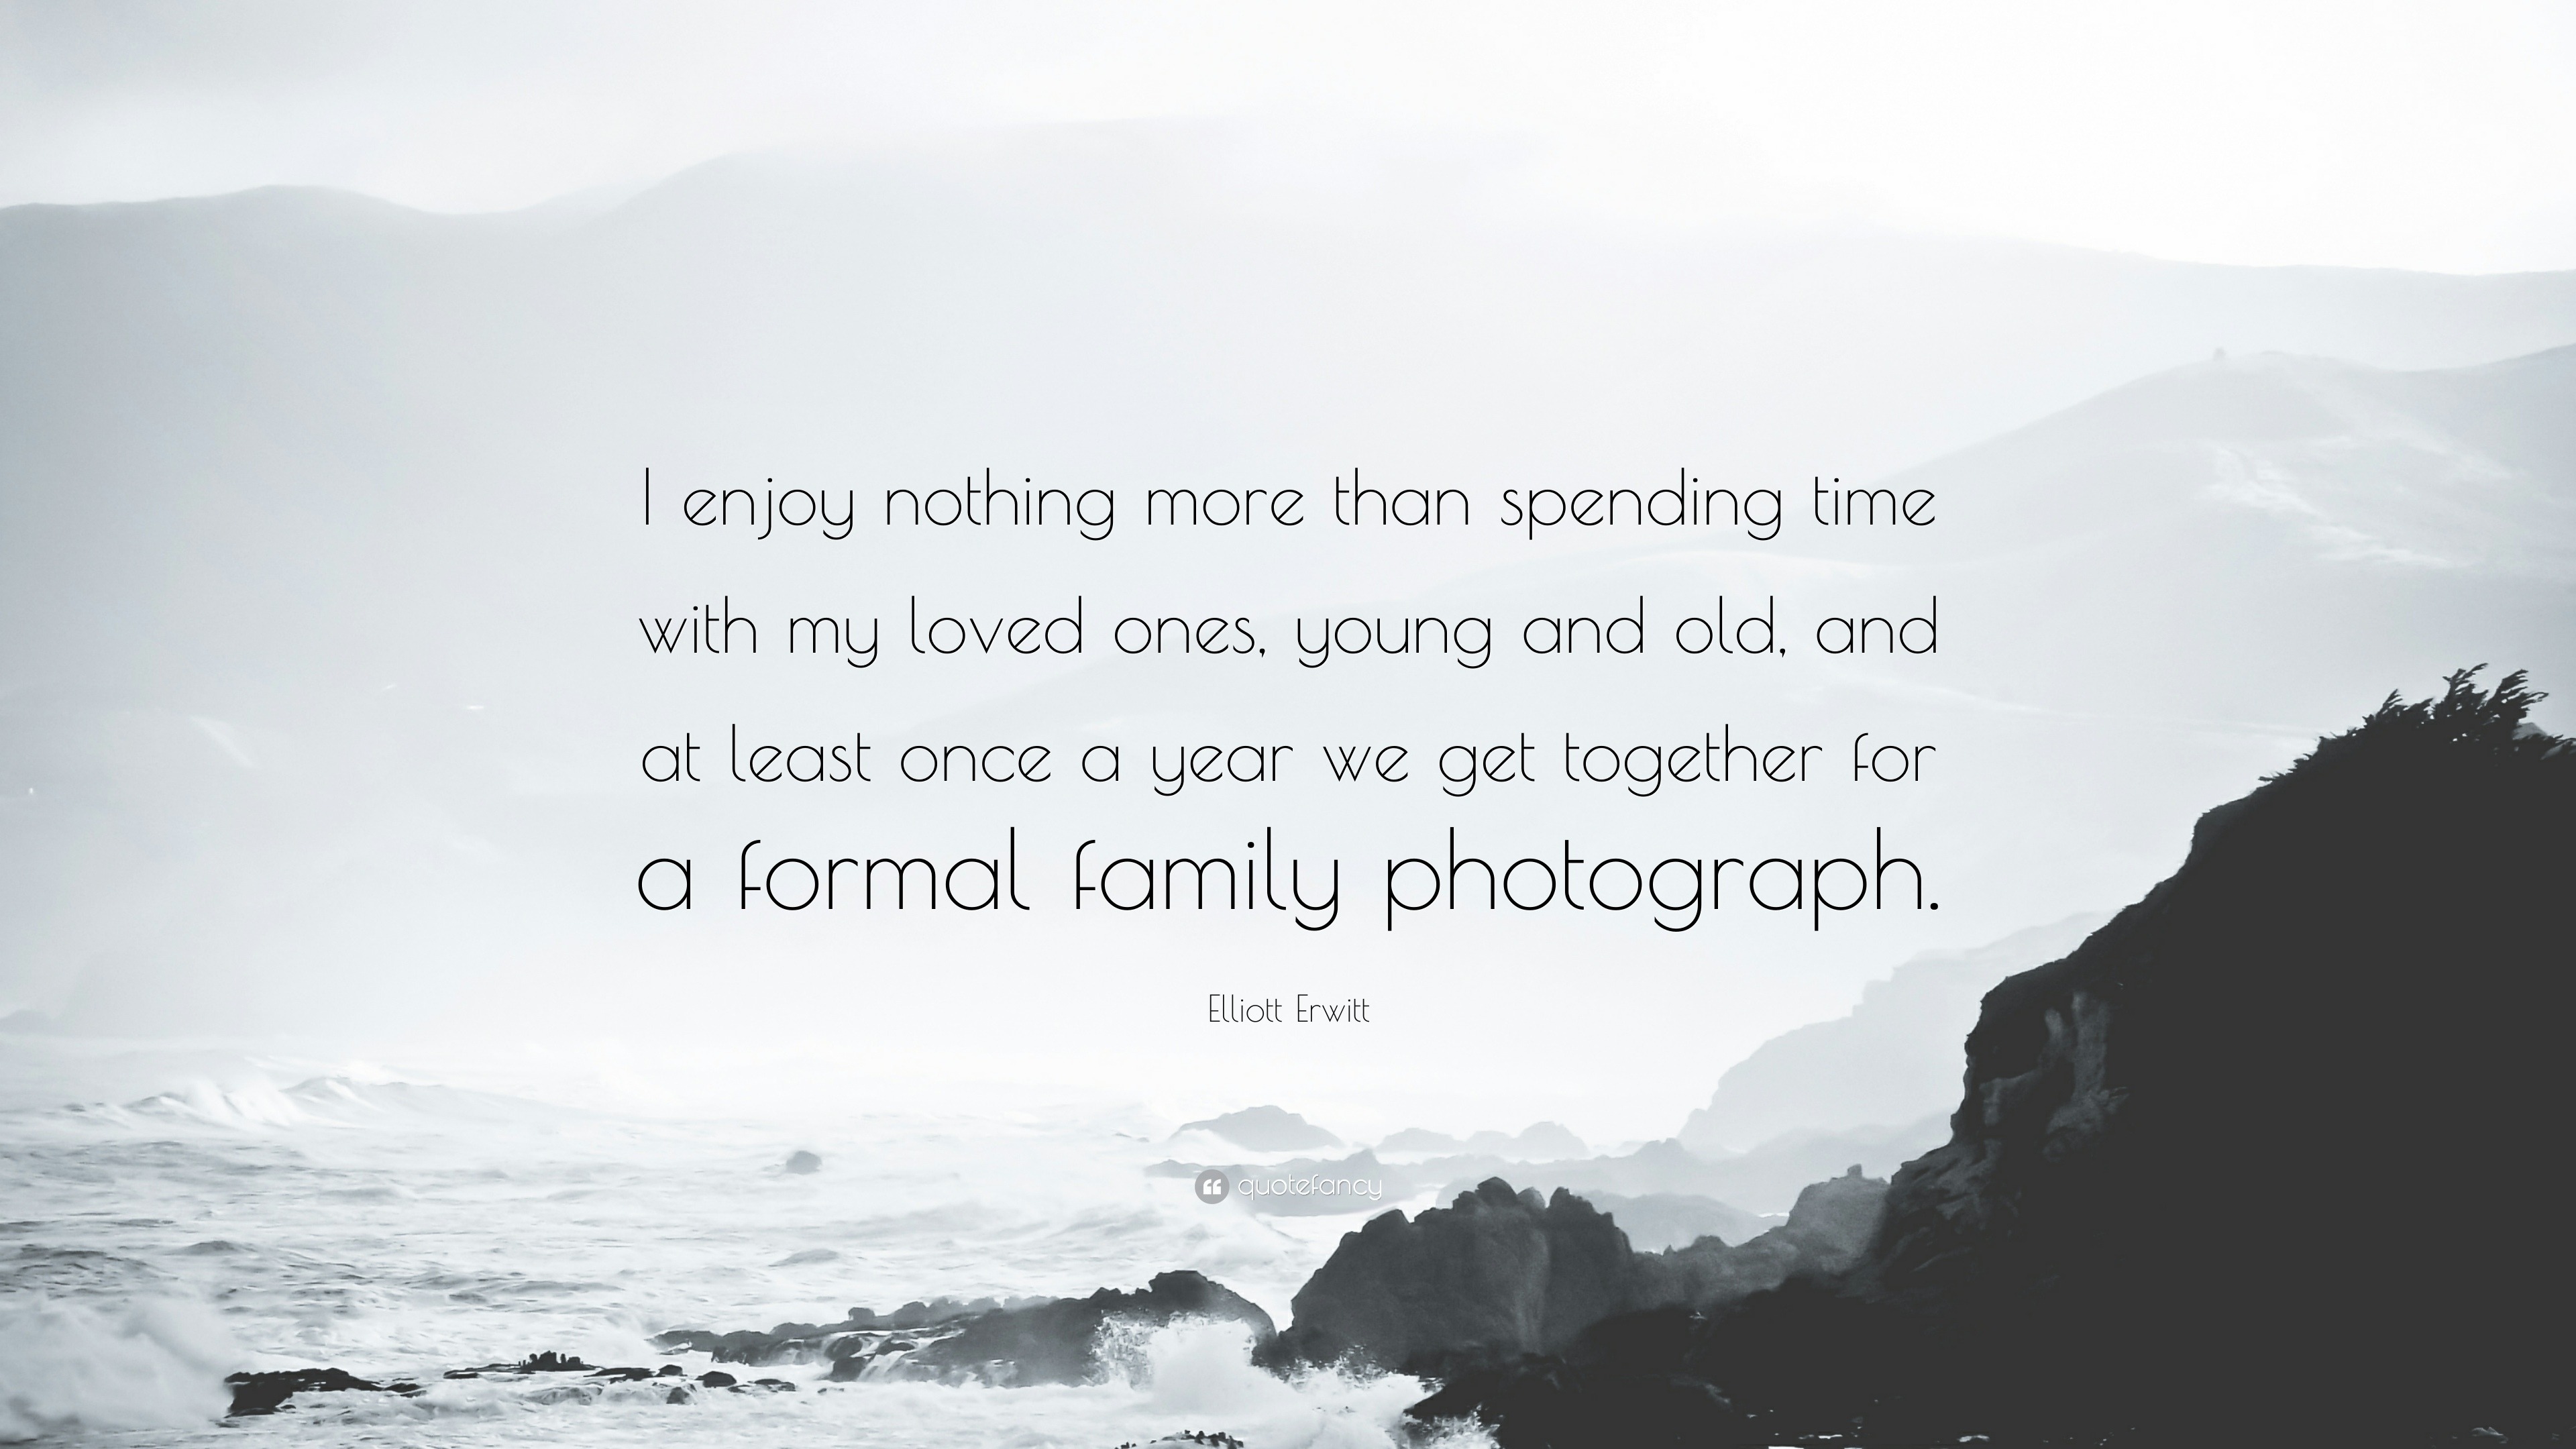 Elliott Erwitt Quote “I enjoy nothing more than spending time with my loved ones